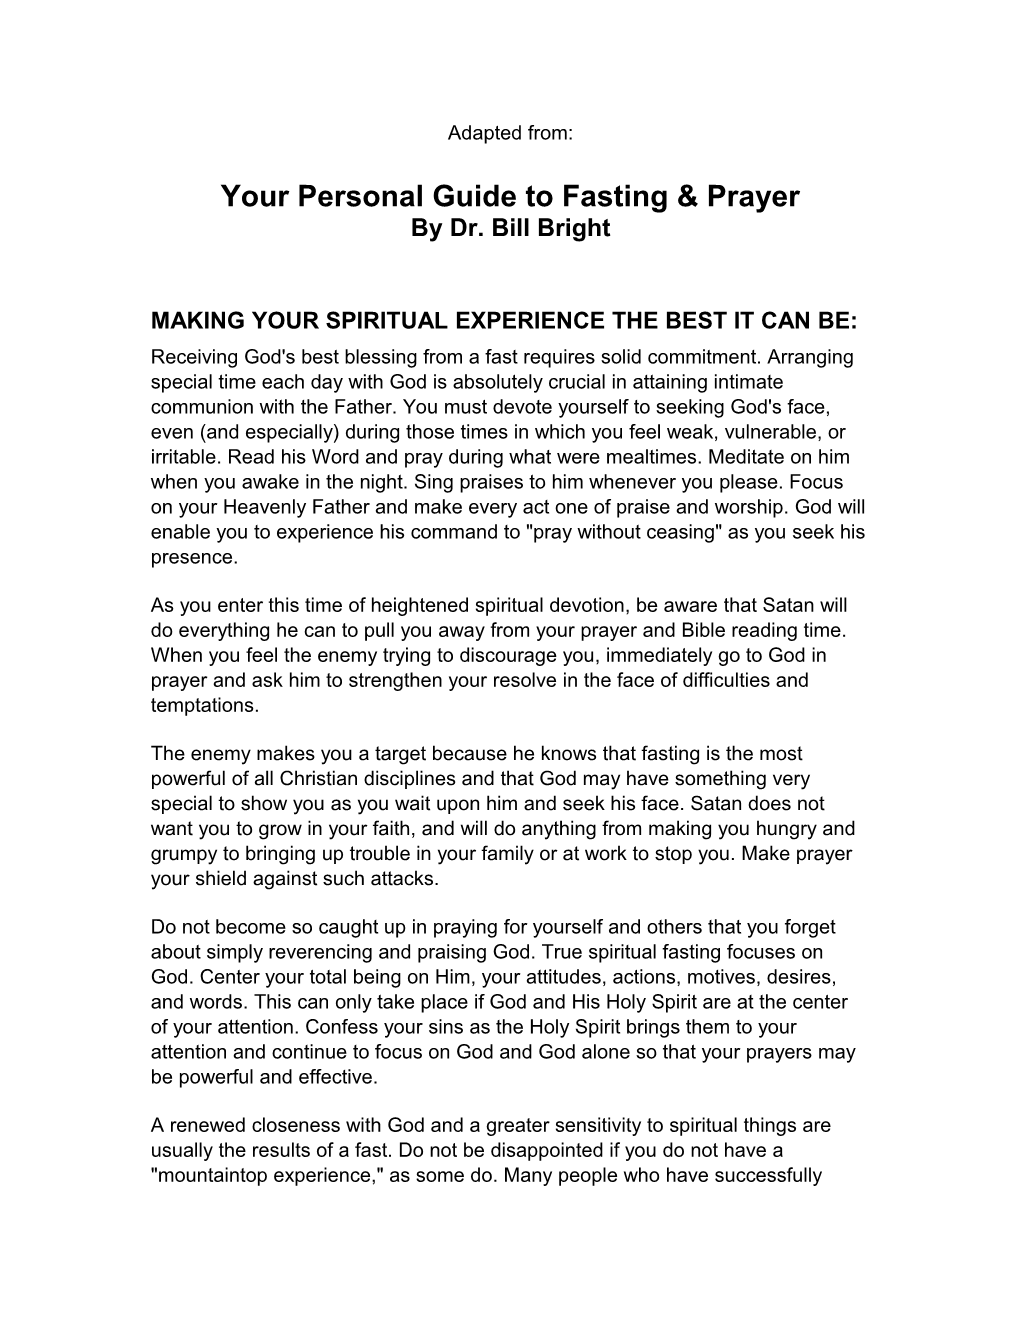 Your Personal Guide to Fasting & Prayer